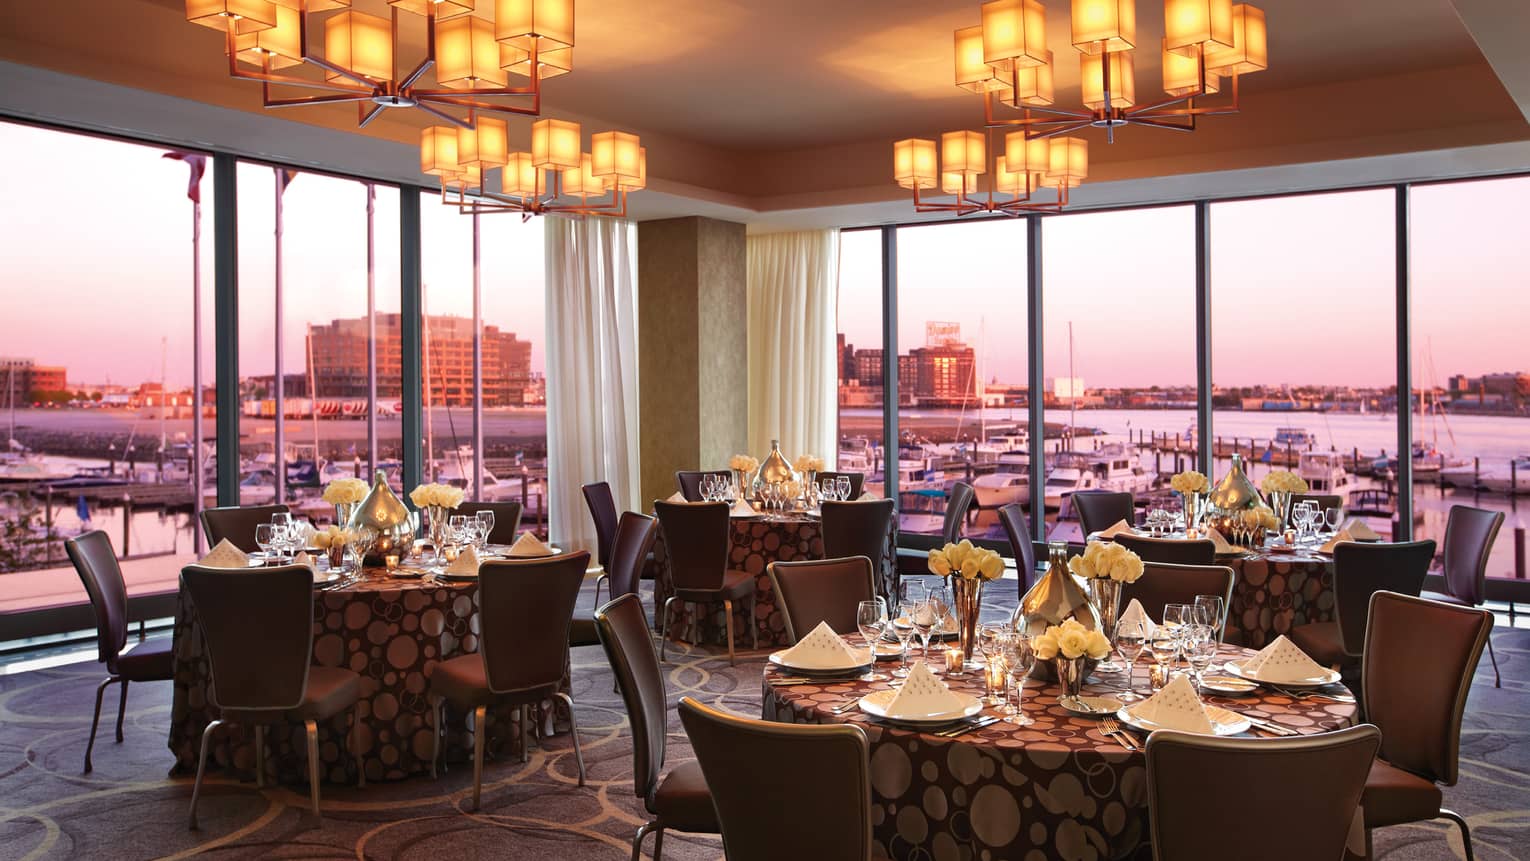 Cerulean banquet room dining tables by corner floor-to-ceiling windows, sunset views